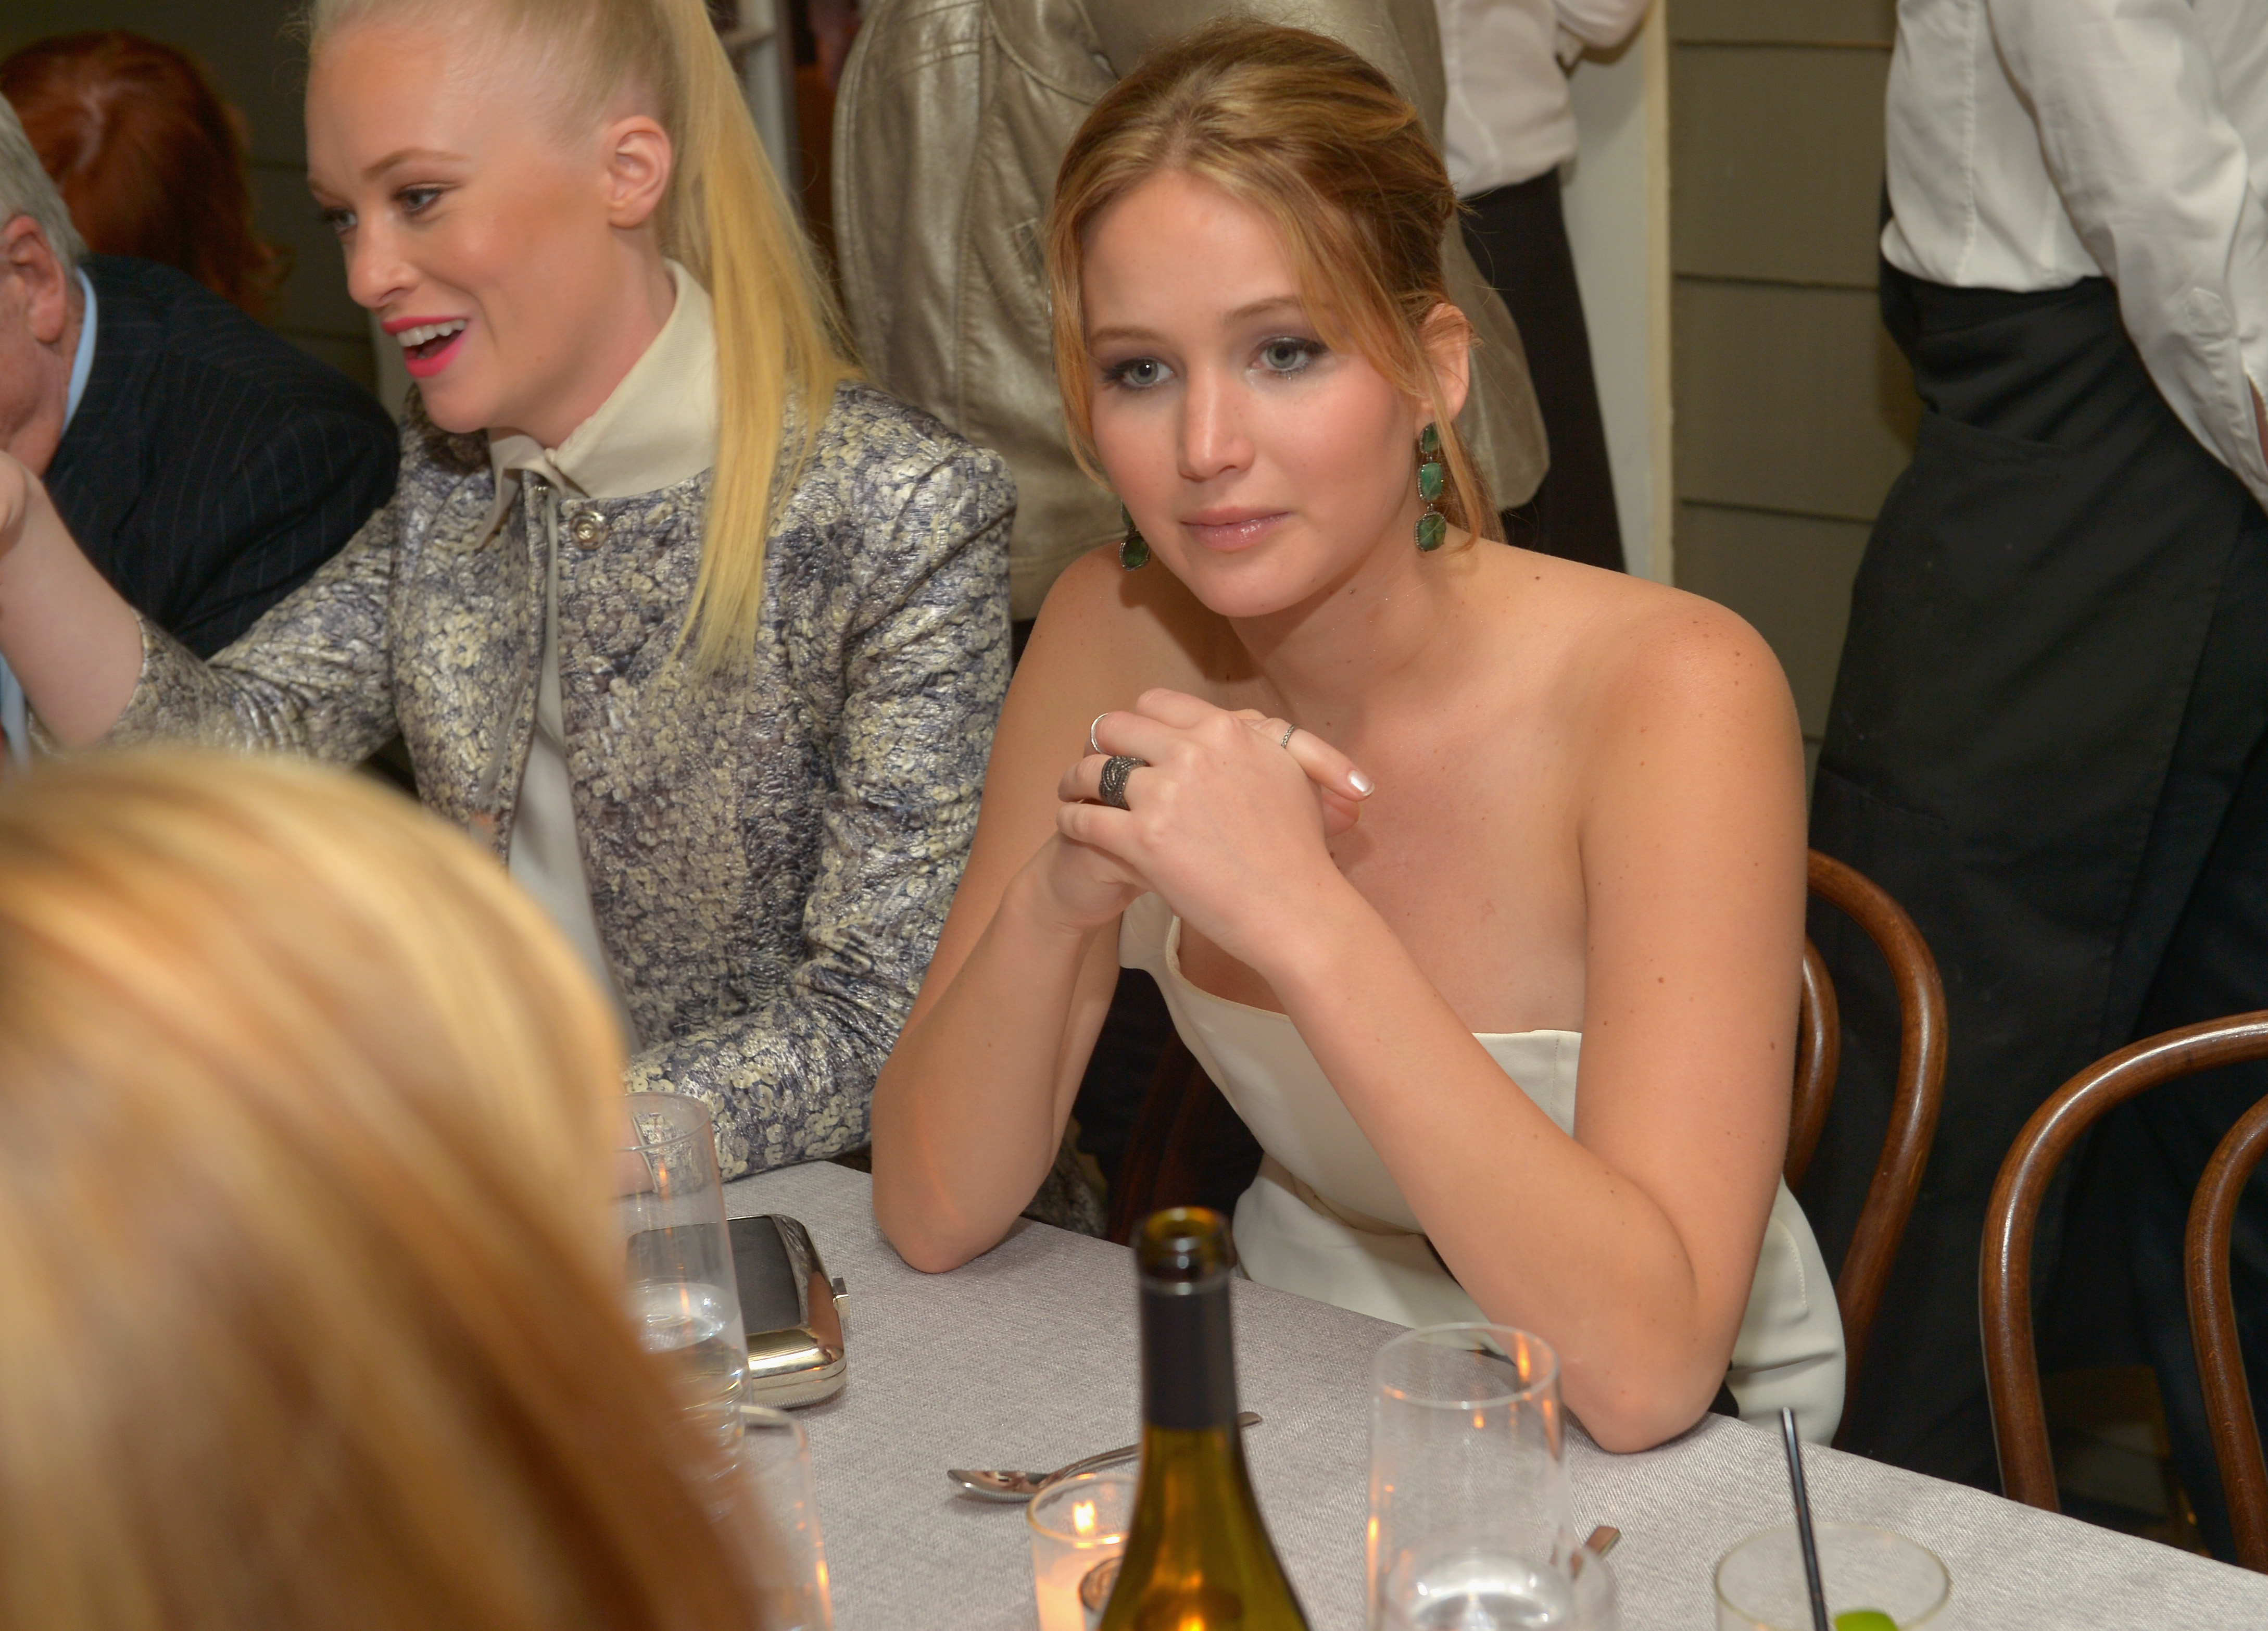 Jennifer Lawrence attends the Vanity Fair, Barneys New York and The Weinstein Company celebration of Silver Linings Playbook in support of The Glenholme School on Feb. 20, 2013 in Los Angeles.